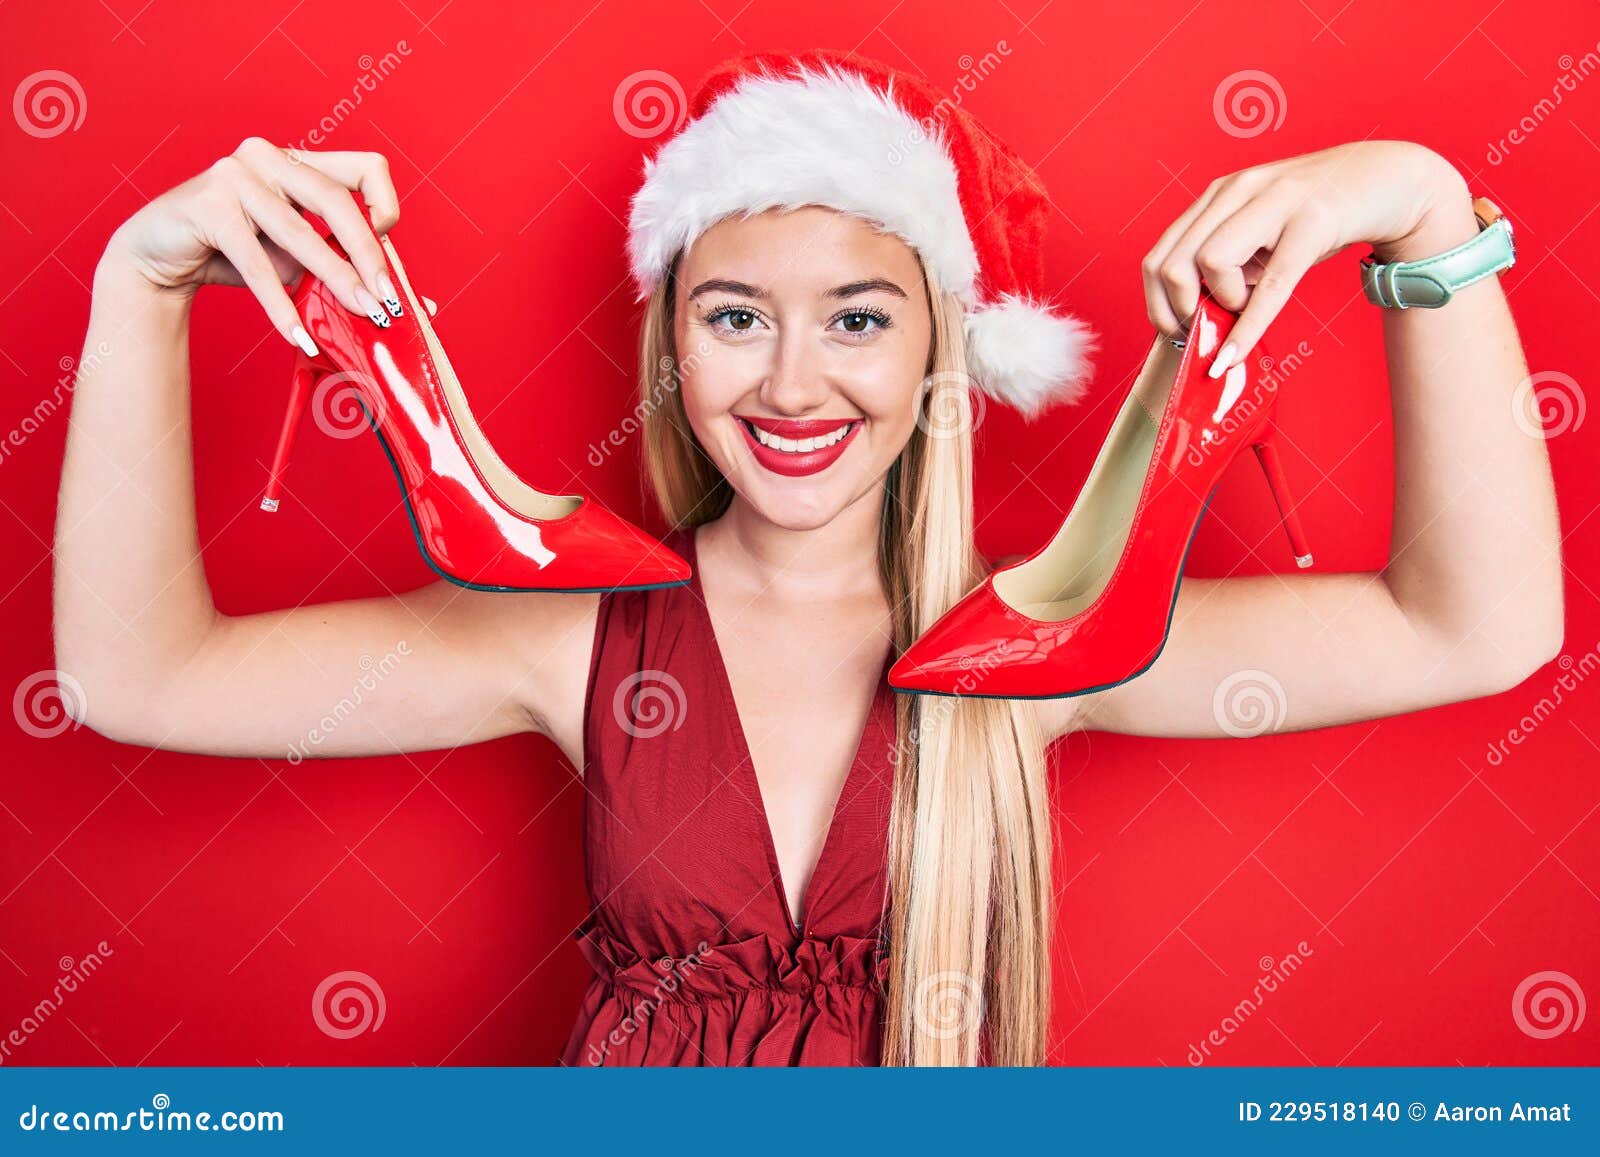 Young Blonde Girl Wearing Christmas Hat Holding High Heel Shoes Smiling ...